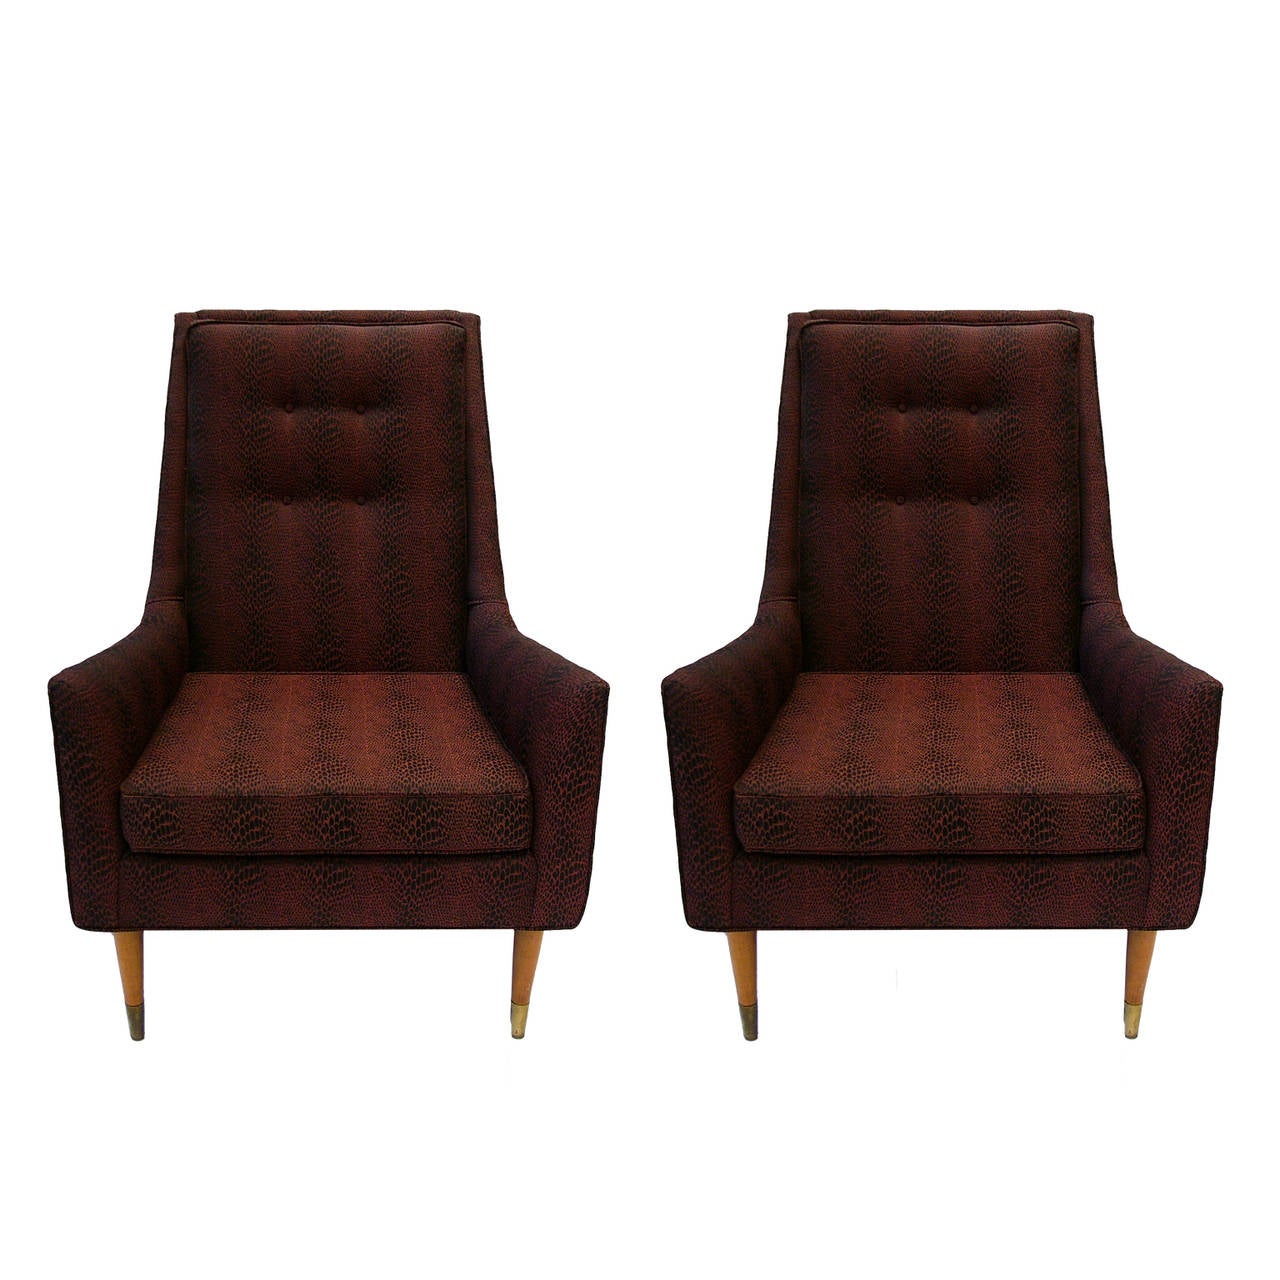 Stunning early Milo Baughman chairs in a lovely python patterned upholstery. Python pattern is black and a red clay color. Foam and upholstery are both in excellent condition. 